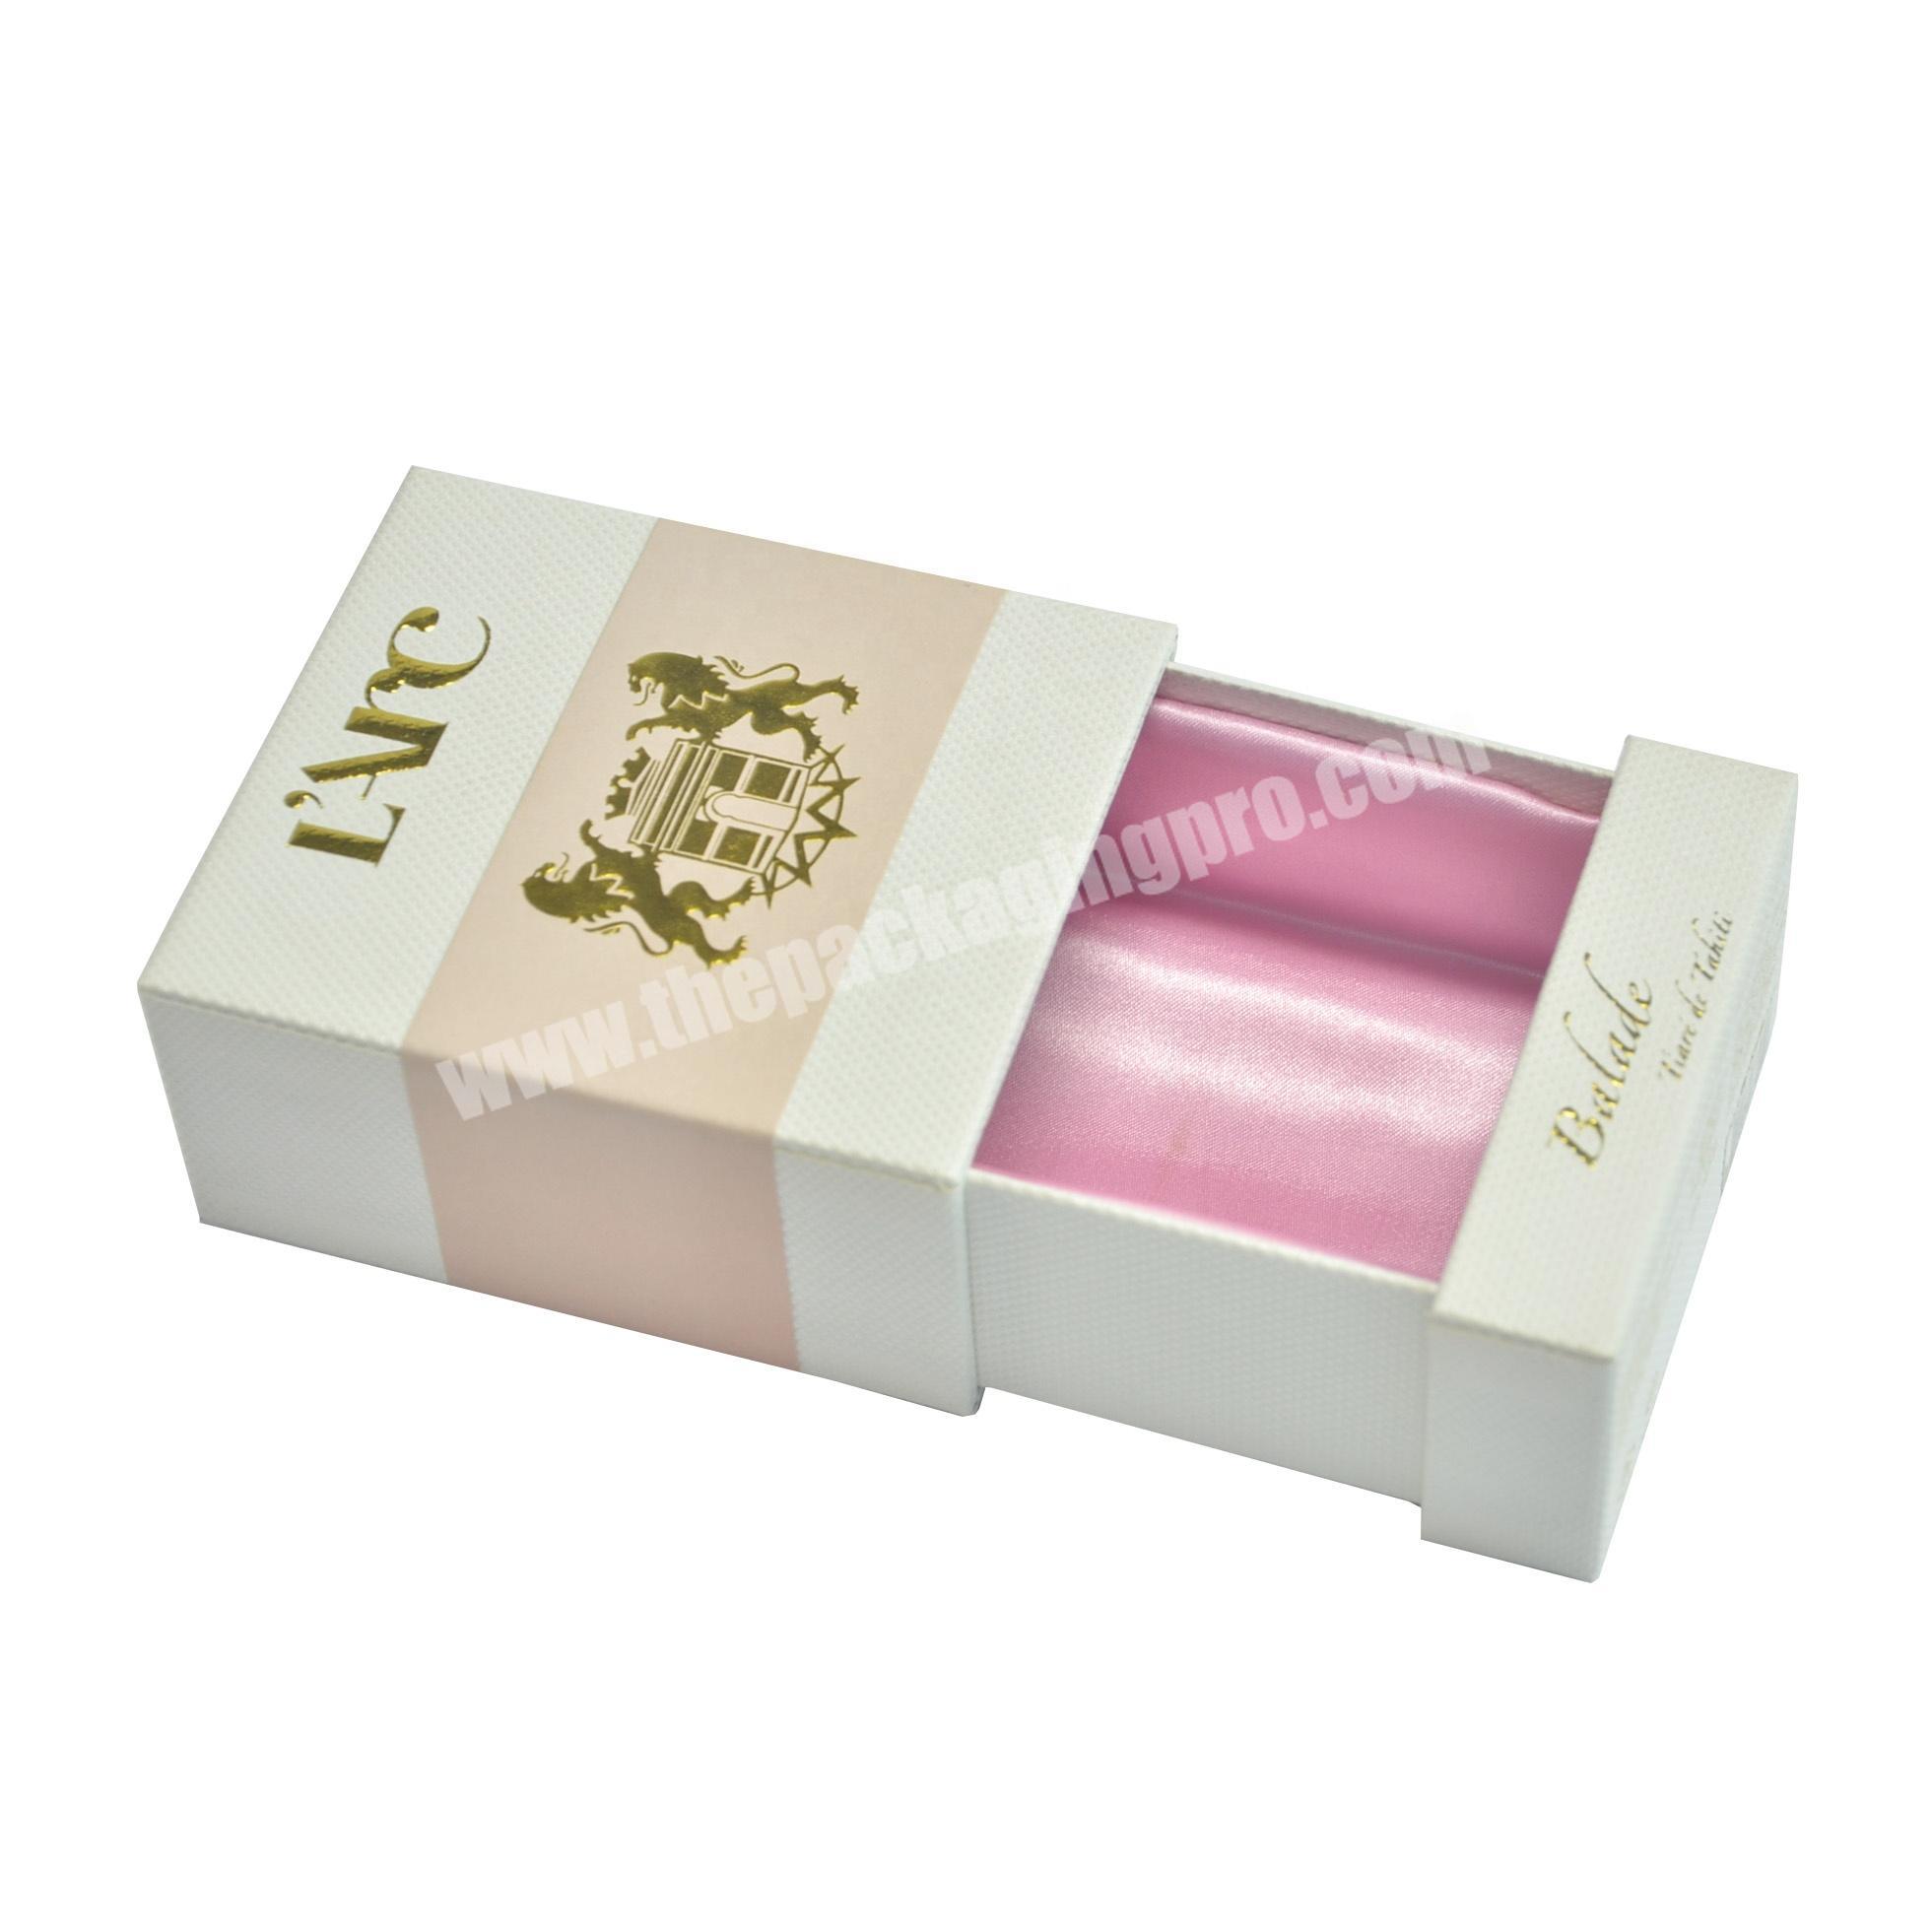 texture paper wrapped fragrance box with silk inside